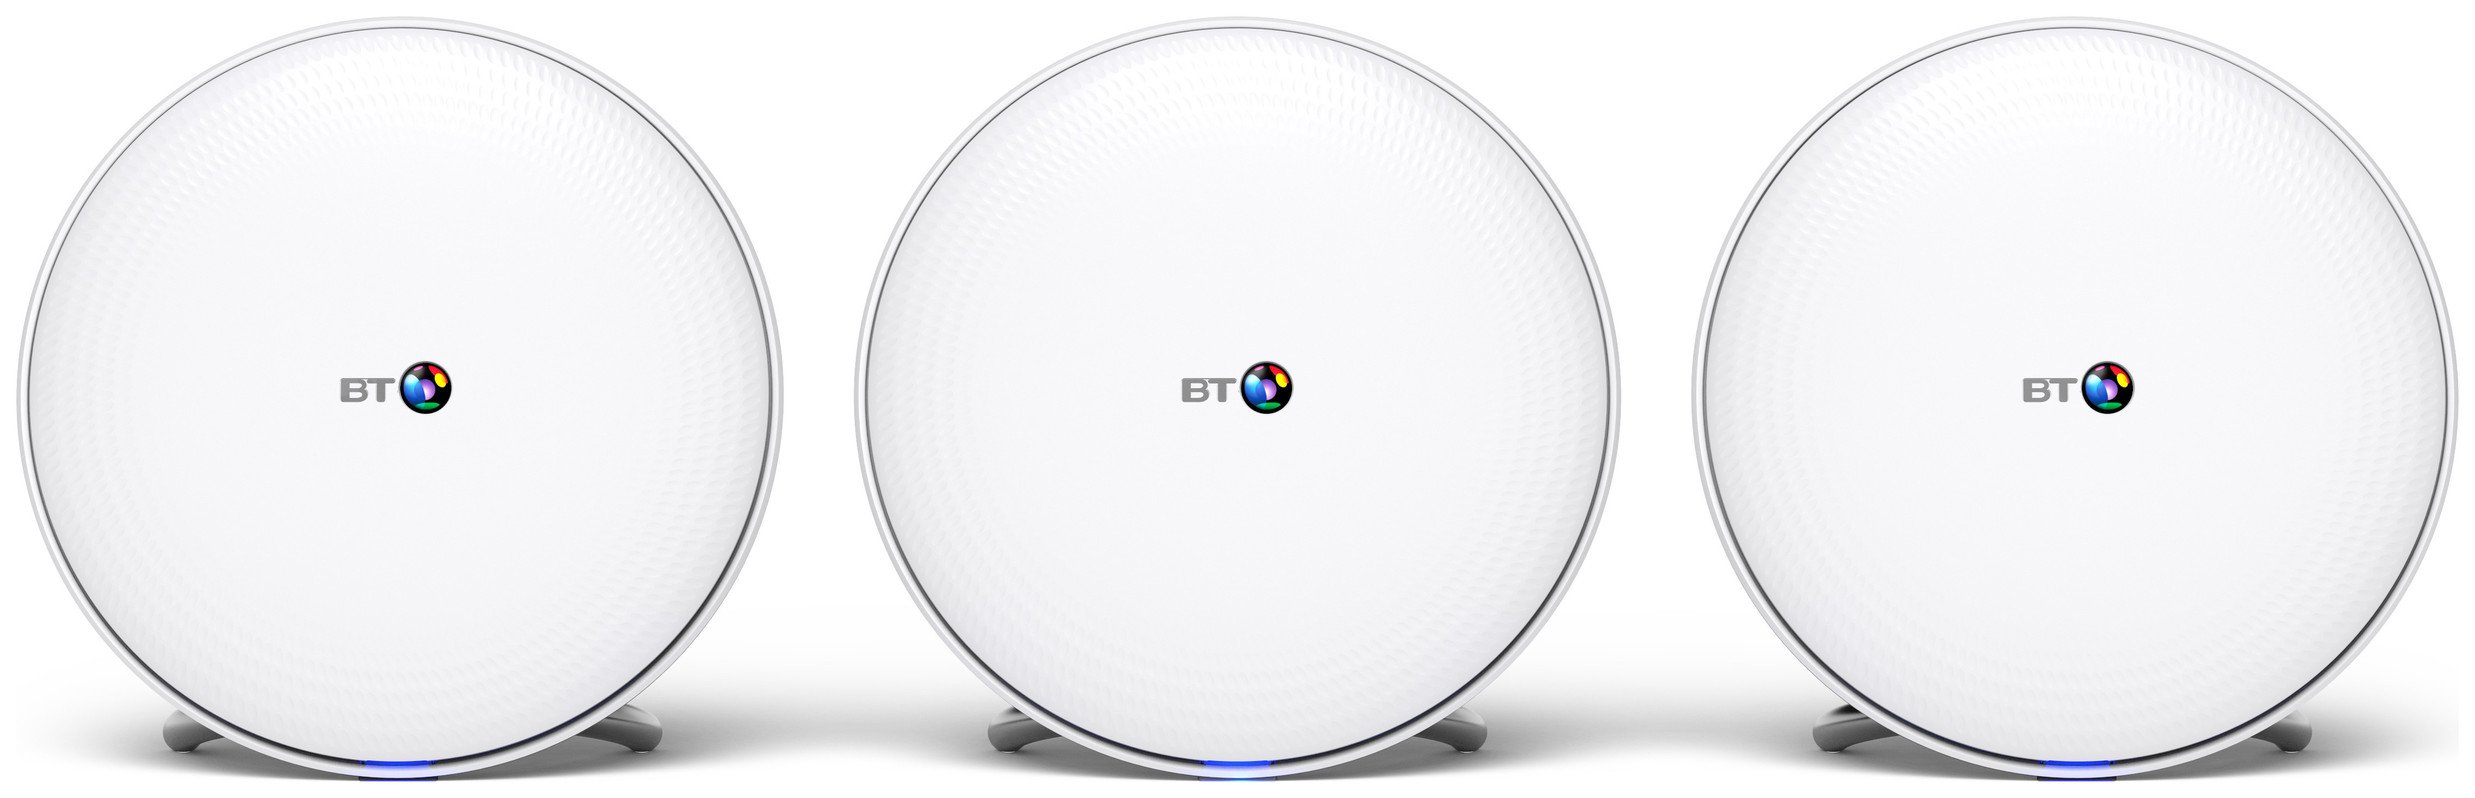 BT Whole Home Wi-Fi Range Extender Kit. Review